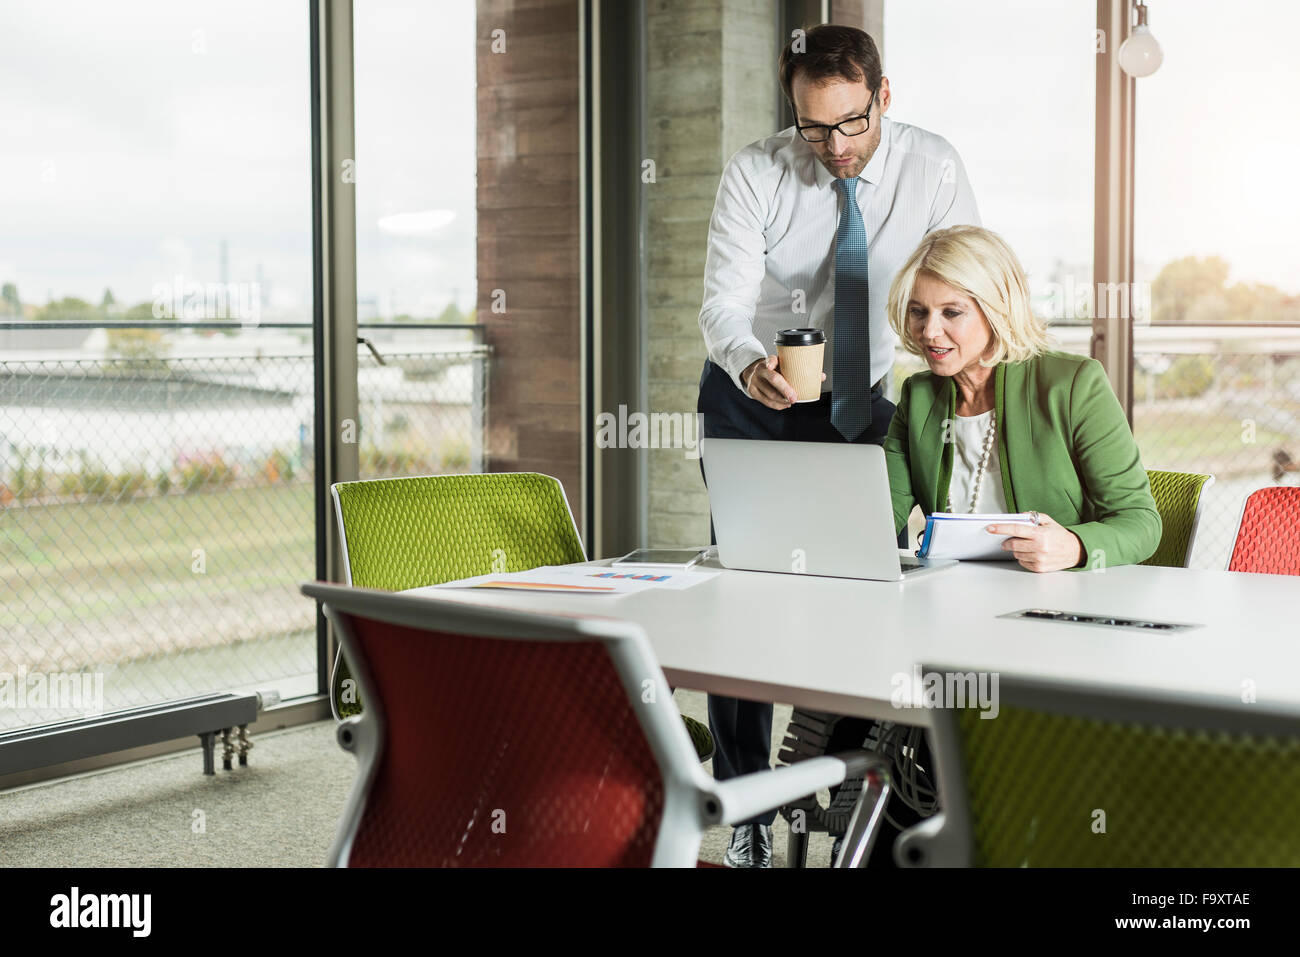 Two business people looking at laptop in an office Stock Photo